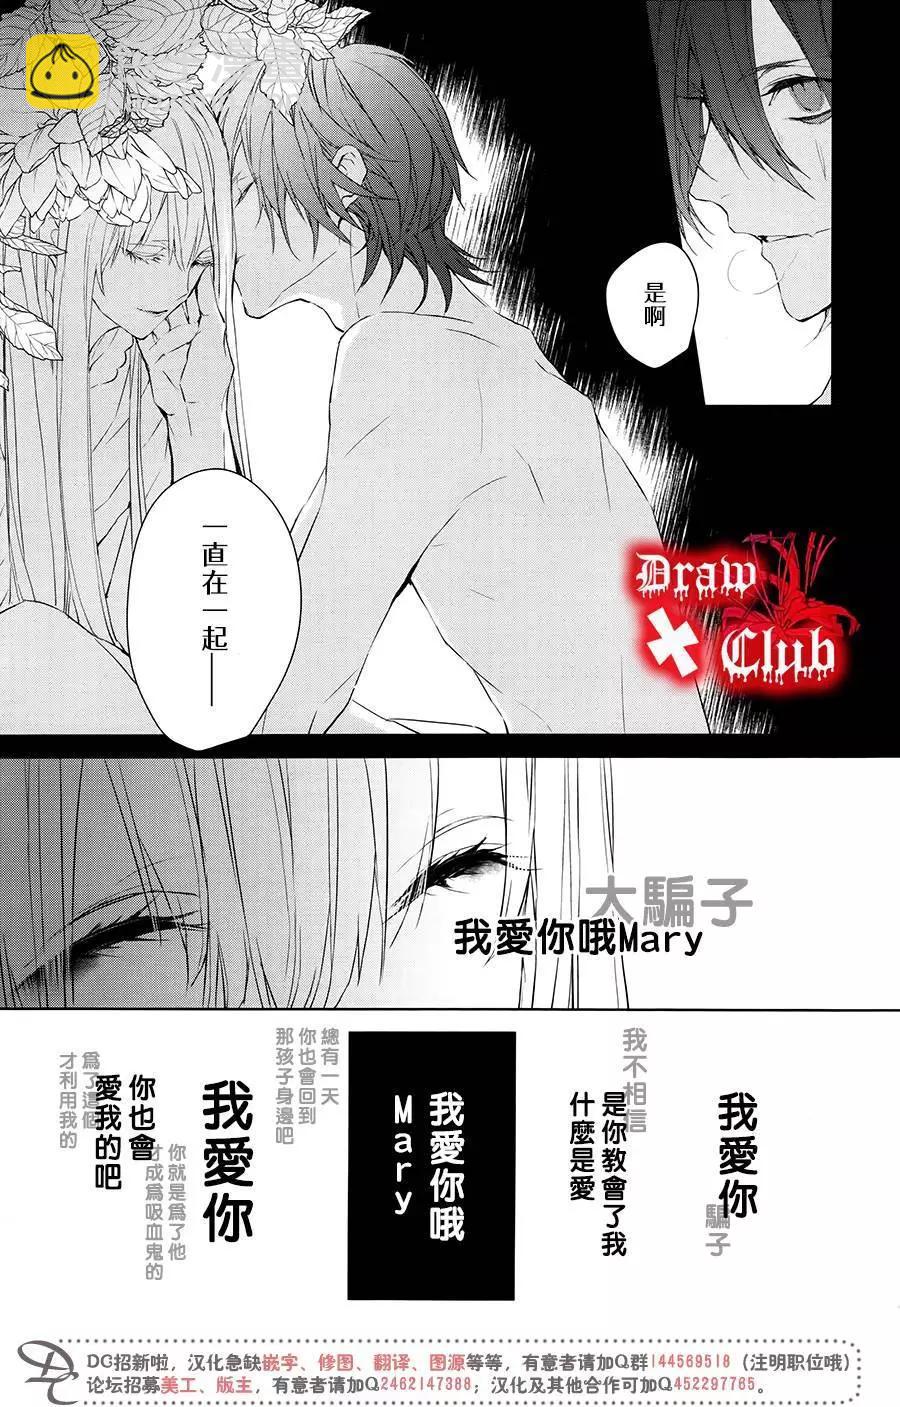 Bloody Mary - 第37回 - 2